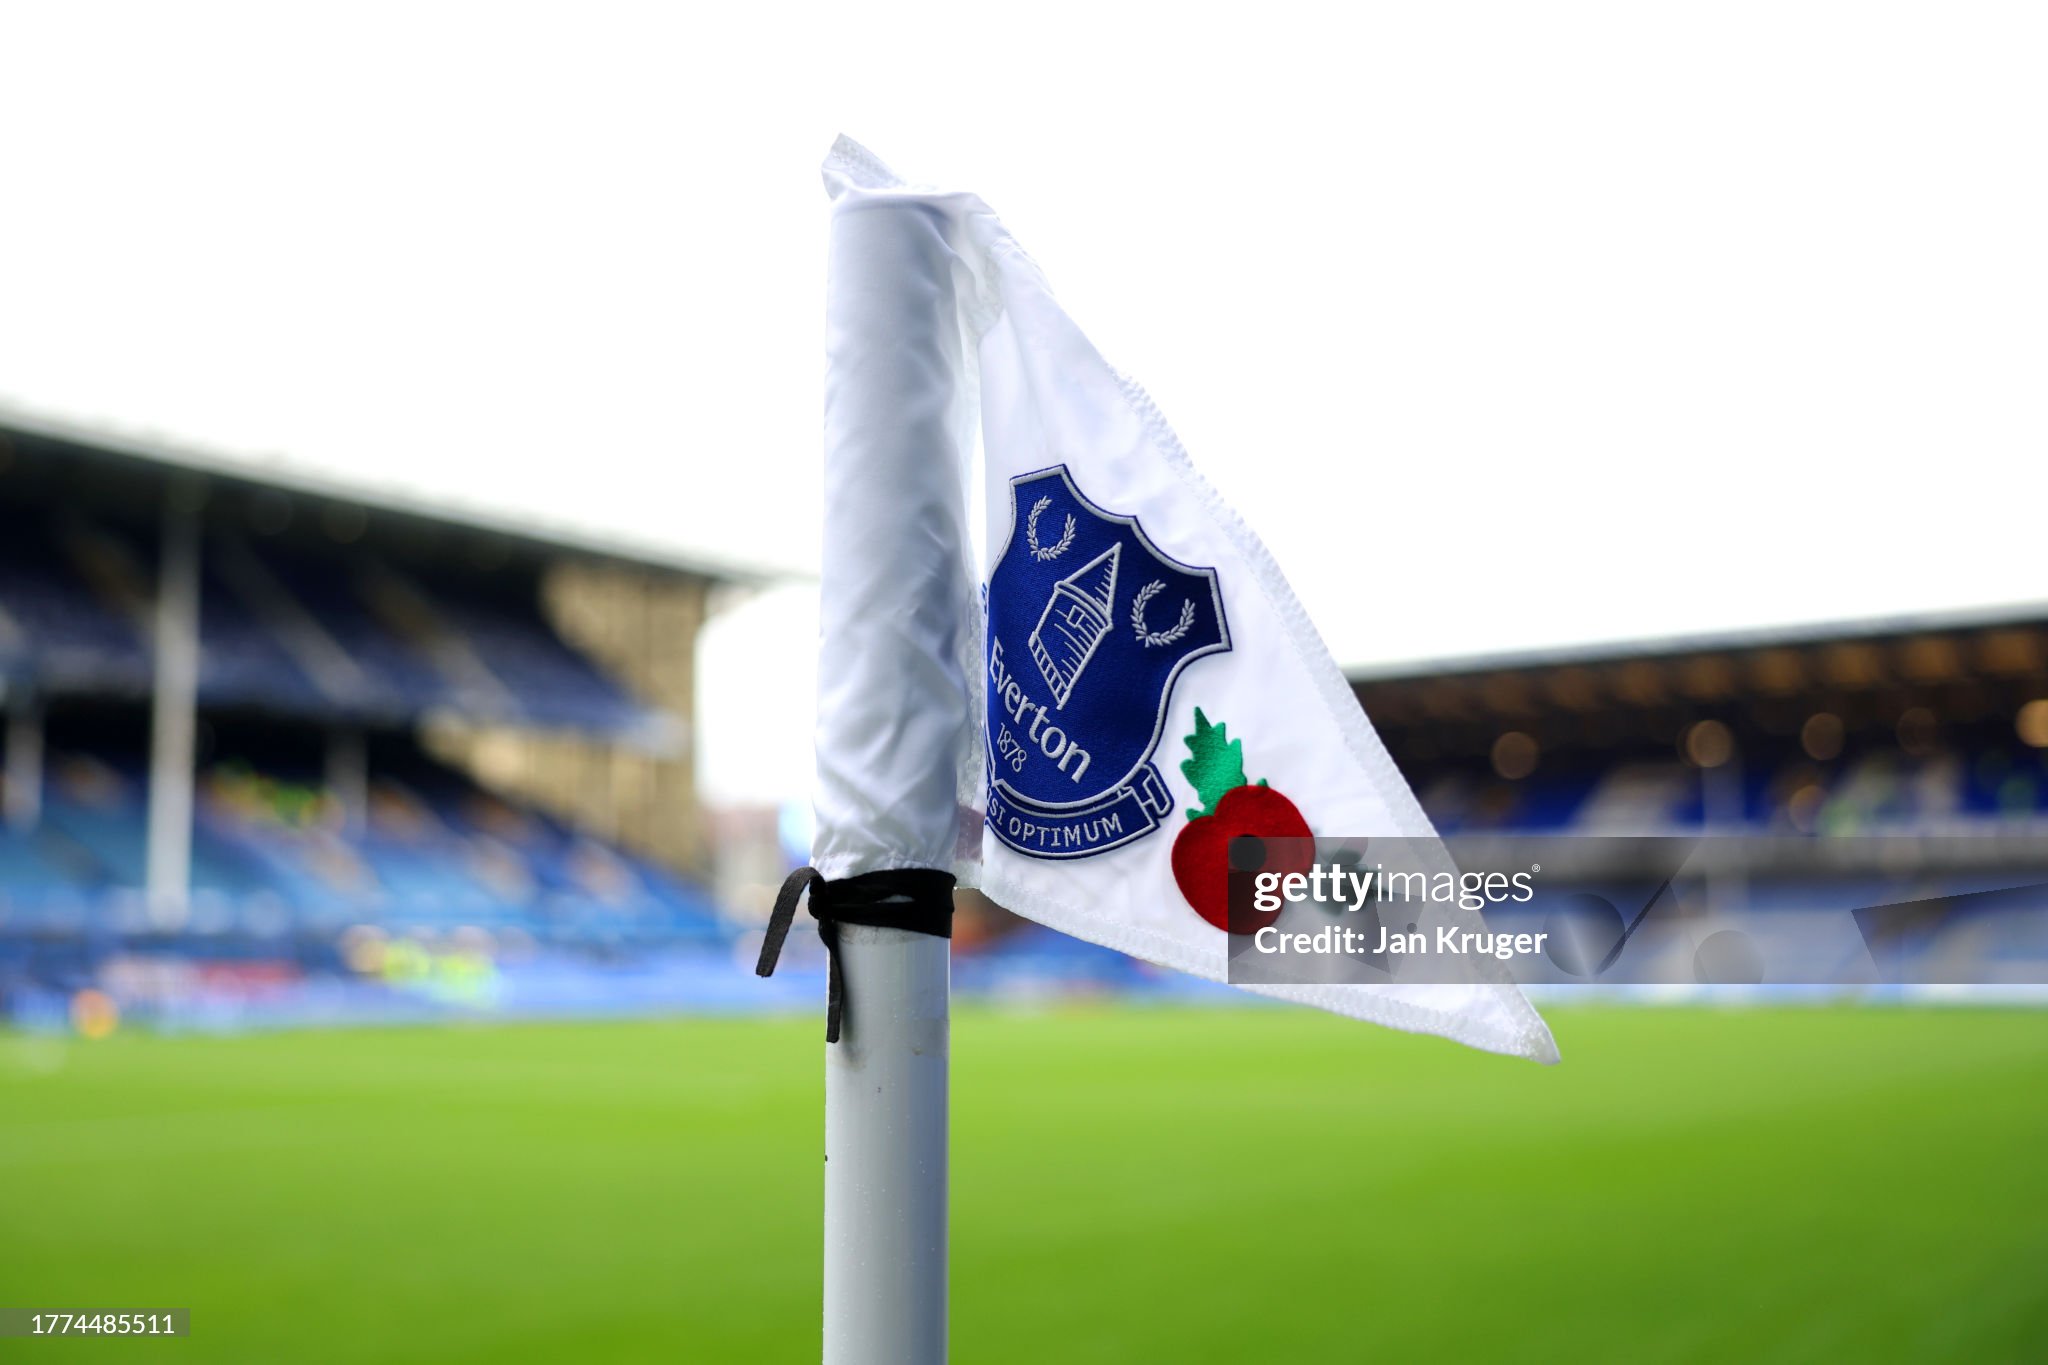 Everton in relegation zone after heavy points deduction, club reacts shocked